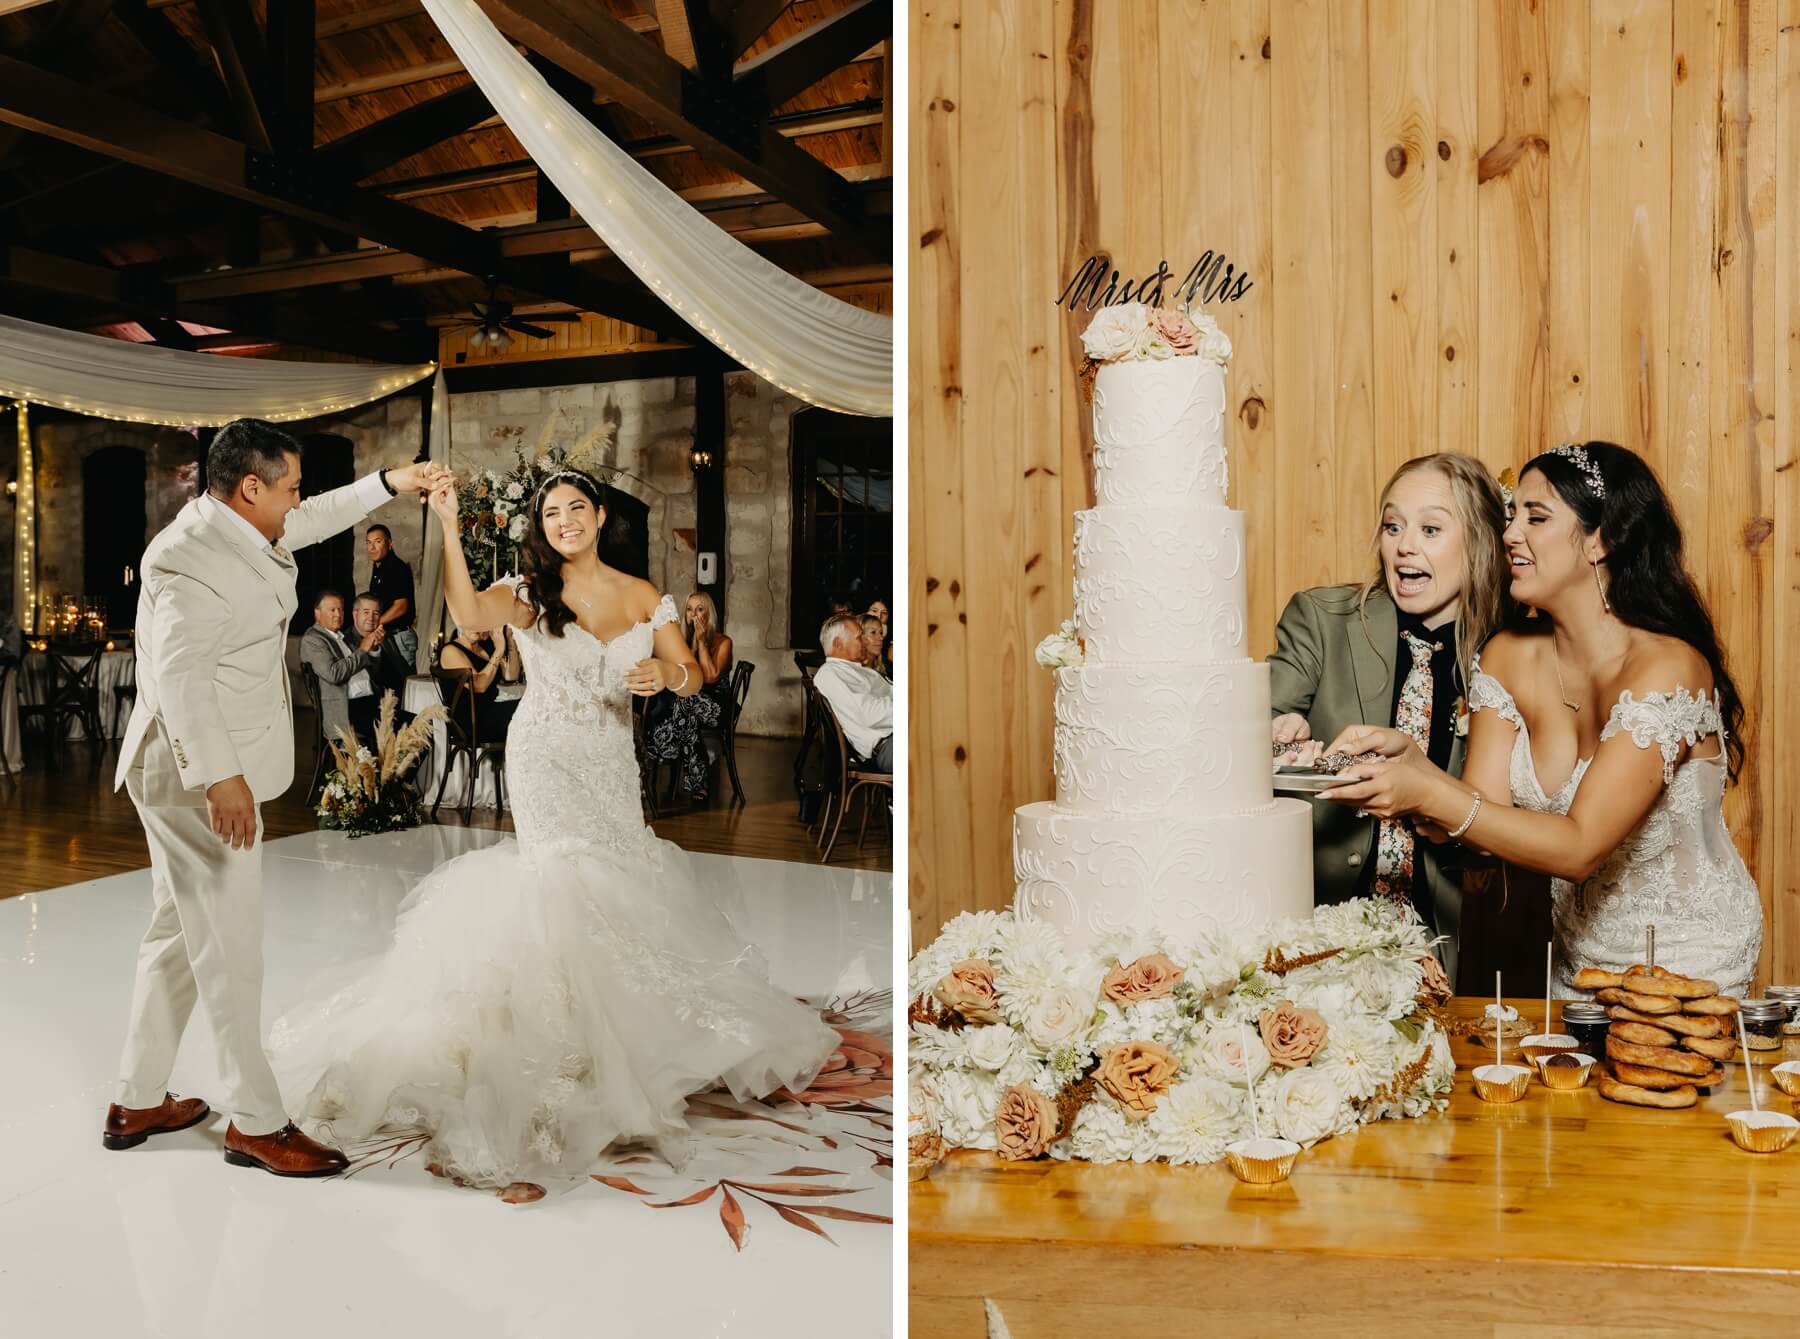 Woman dancing with her dad and couple cutting cake 